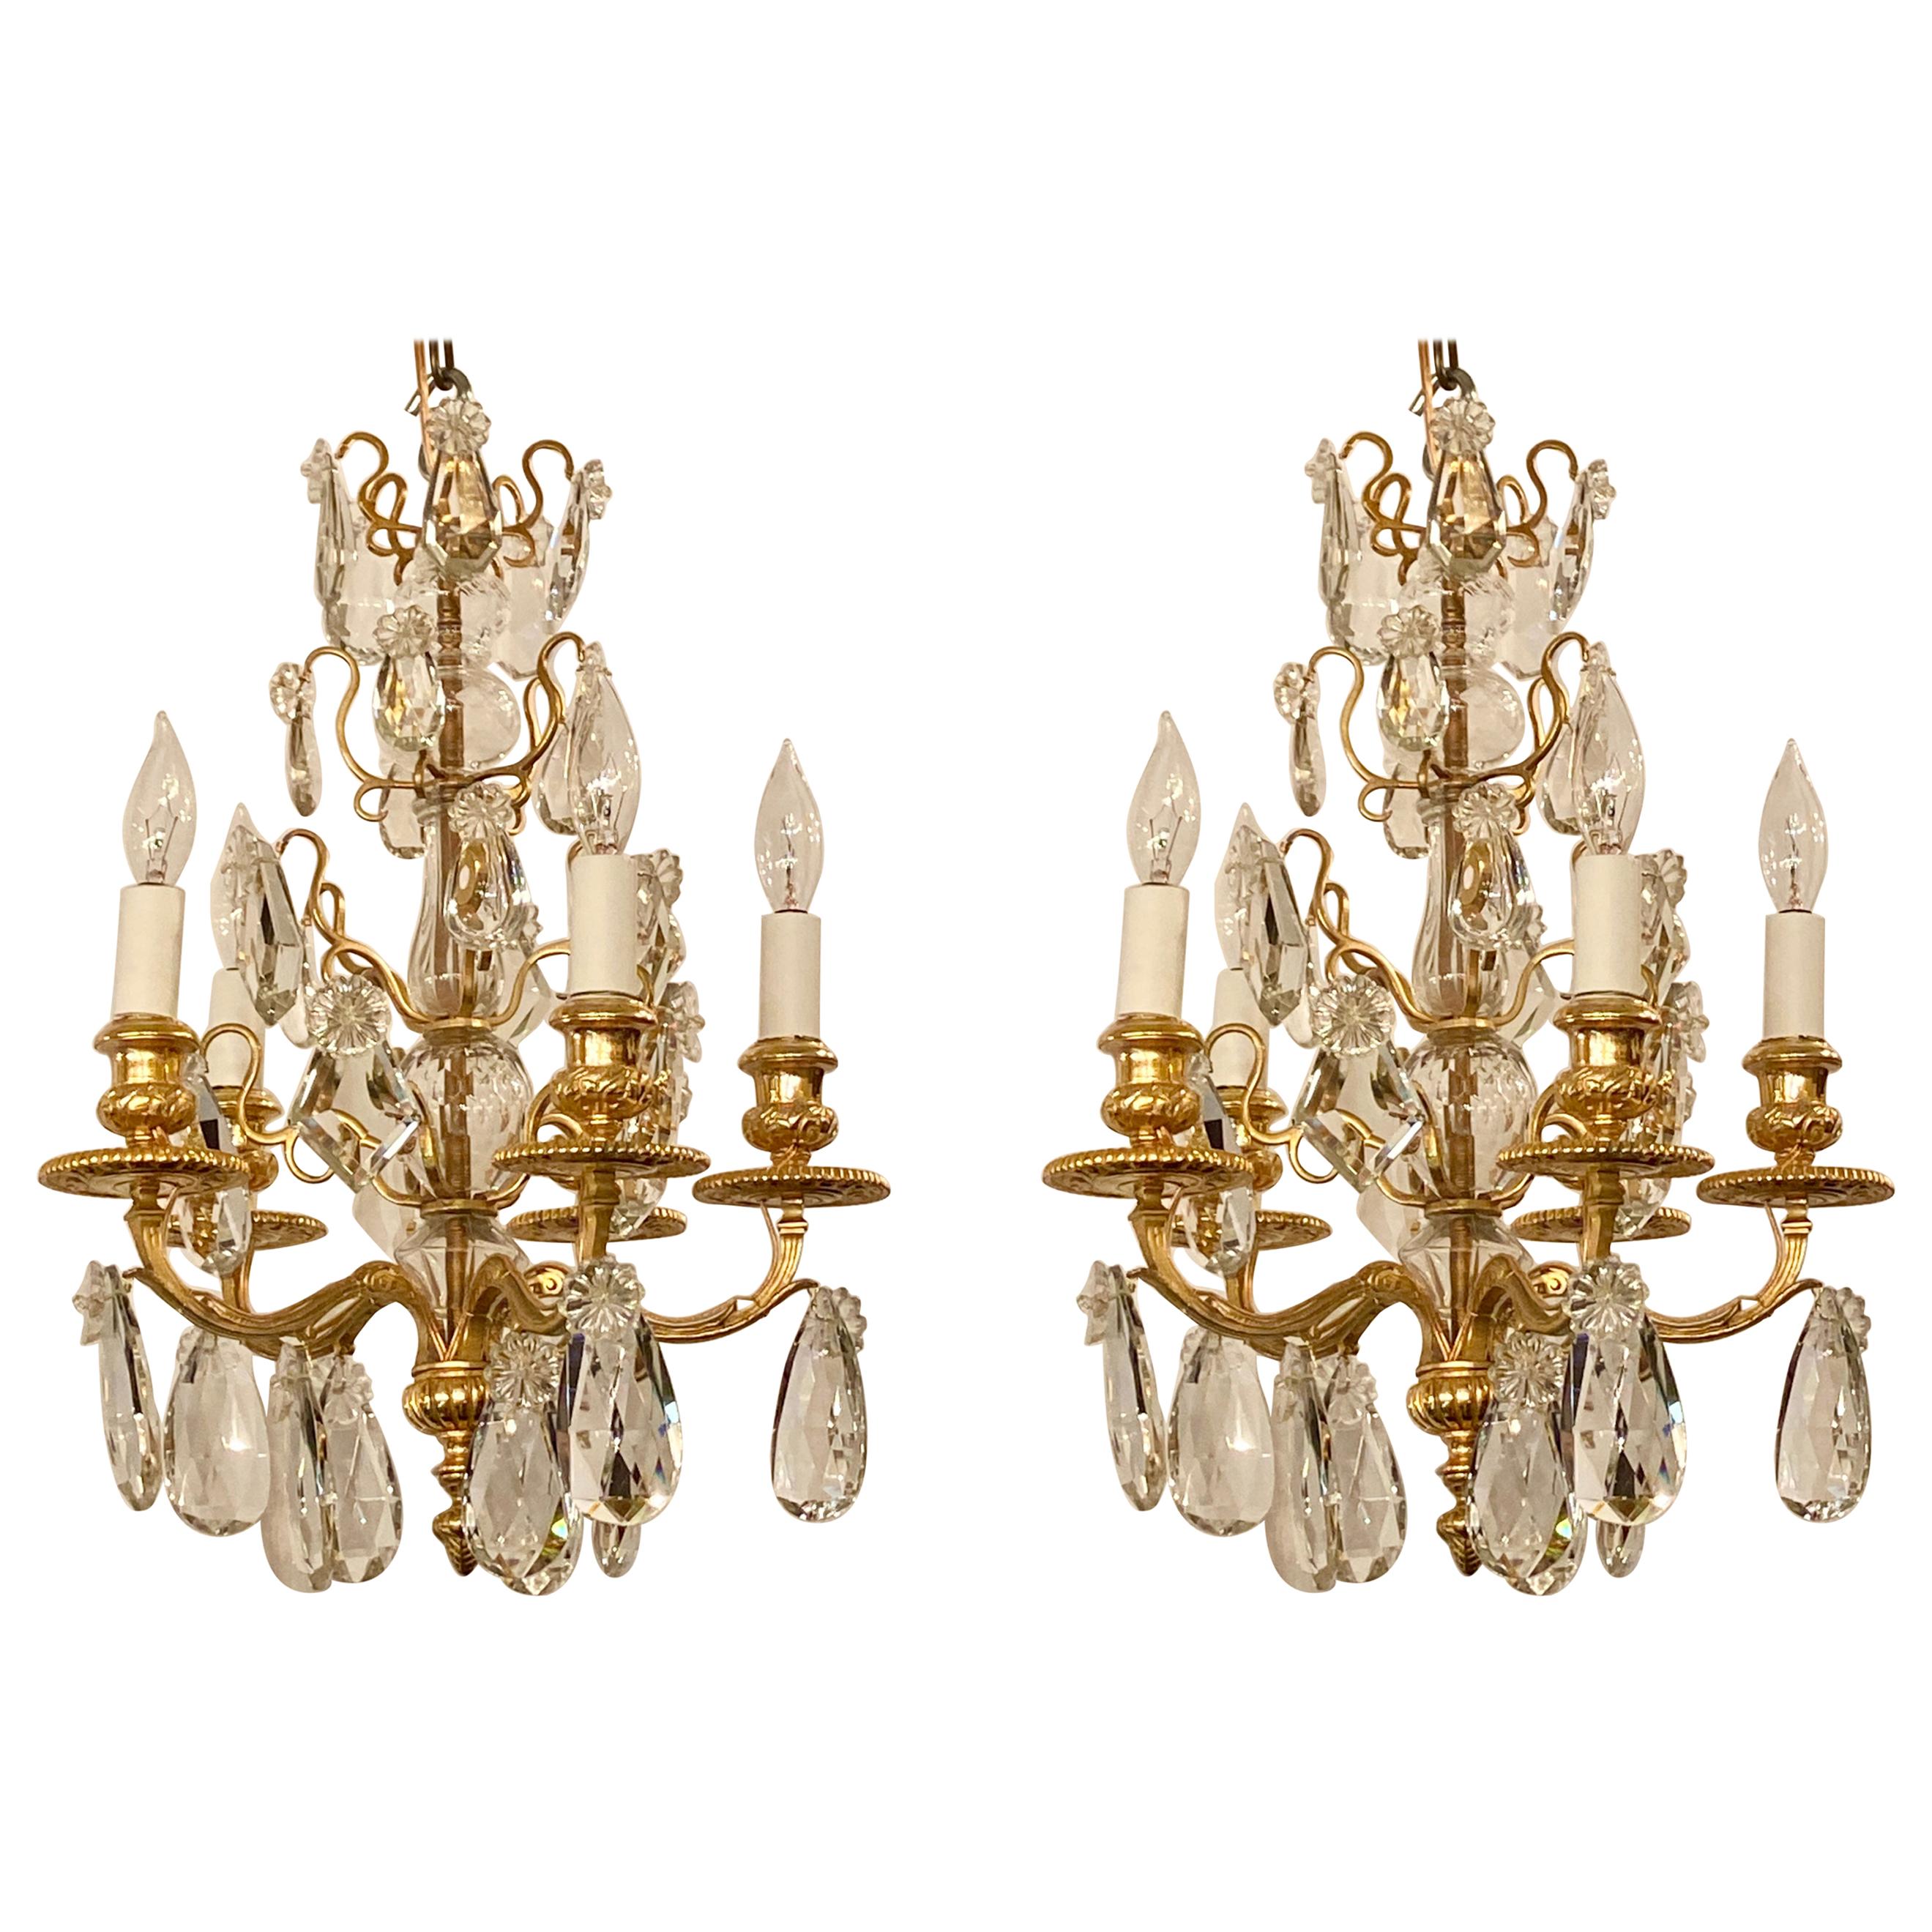 Pair Antique French Bronze D'ore and Crystal Chandeliers, Circa 1890-1900